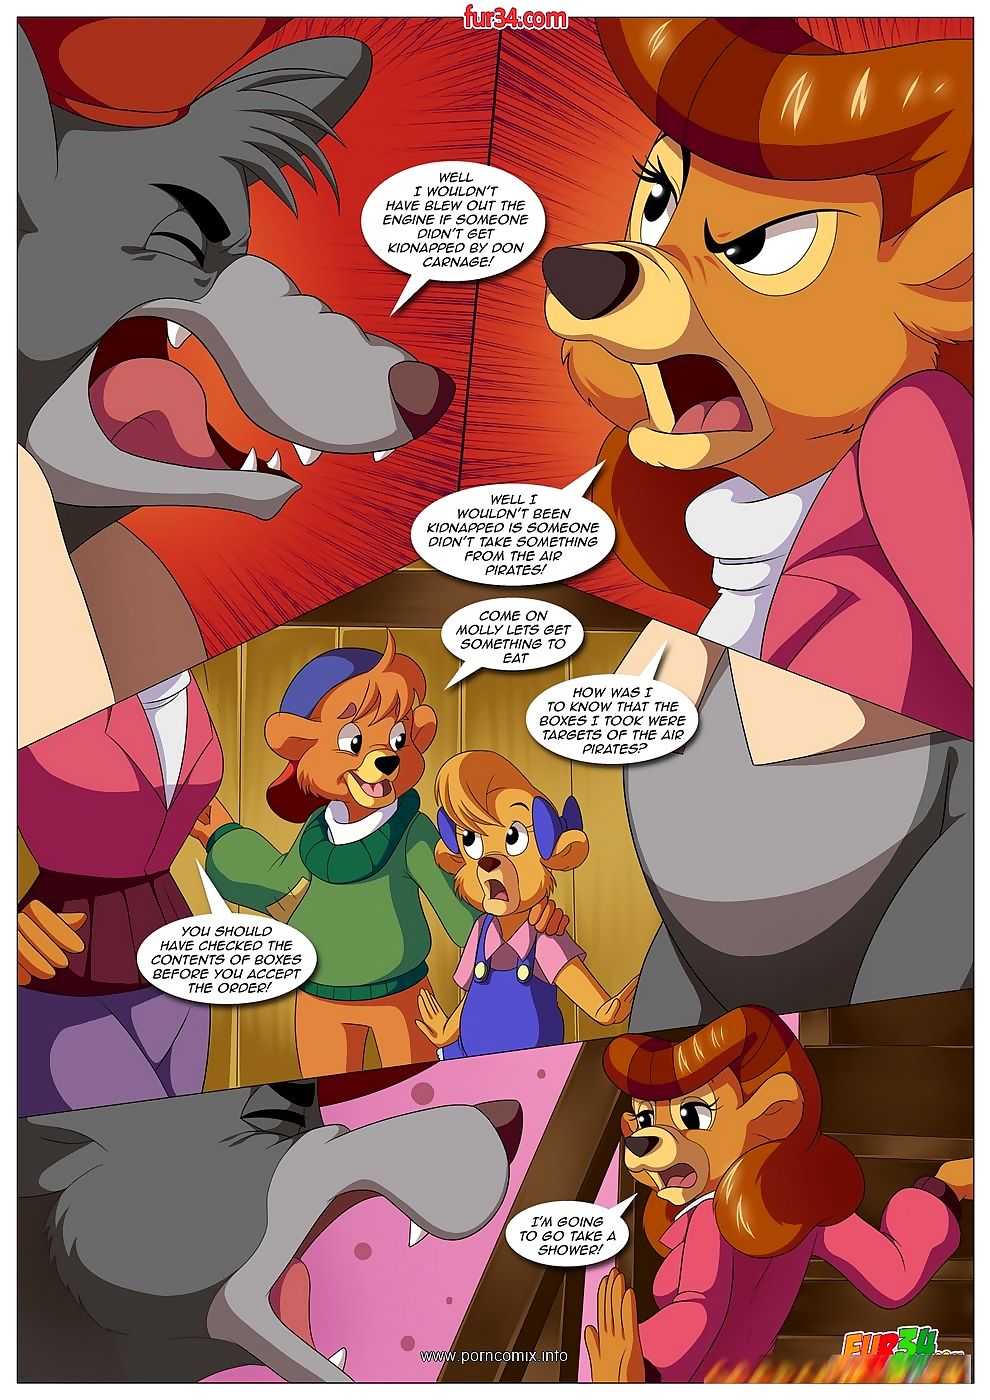 TaleSpin- Tale Fling- Palcomix page 1